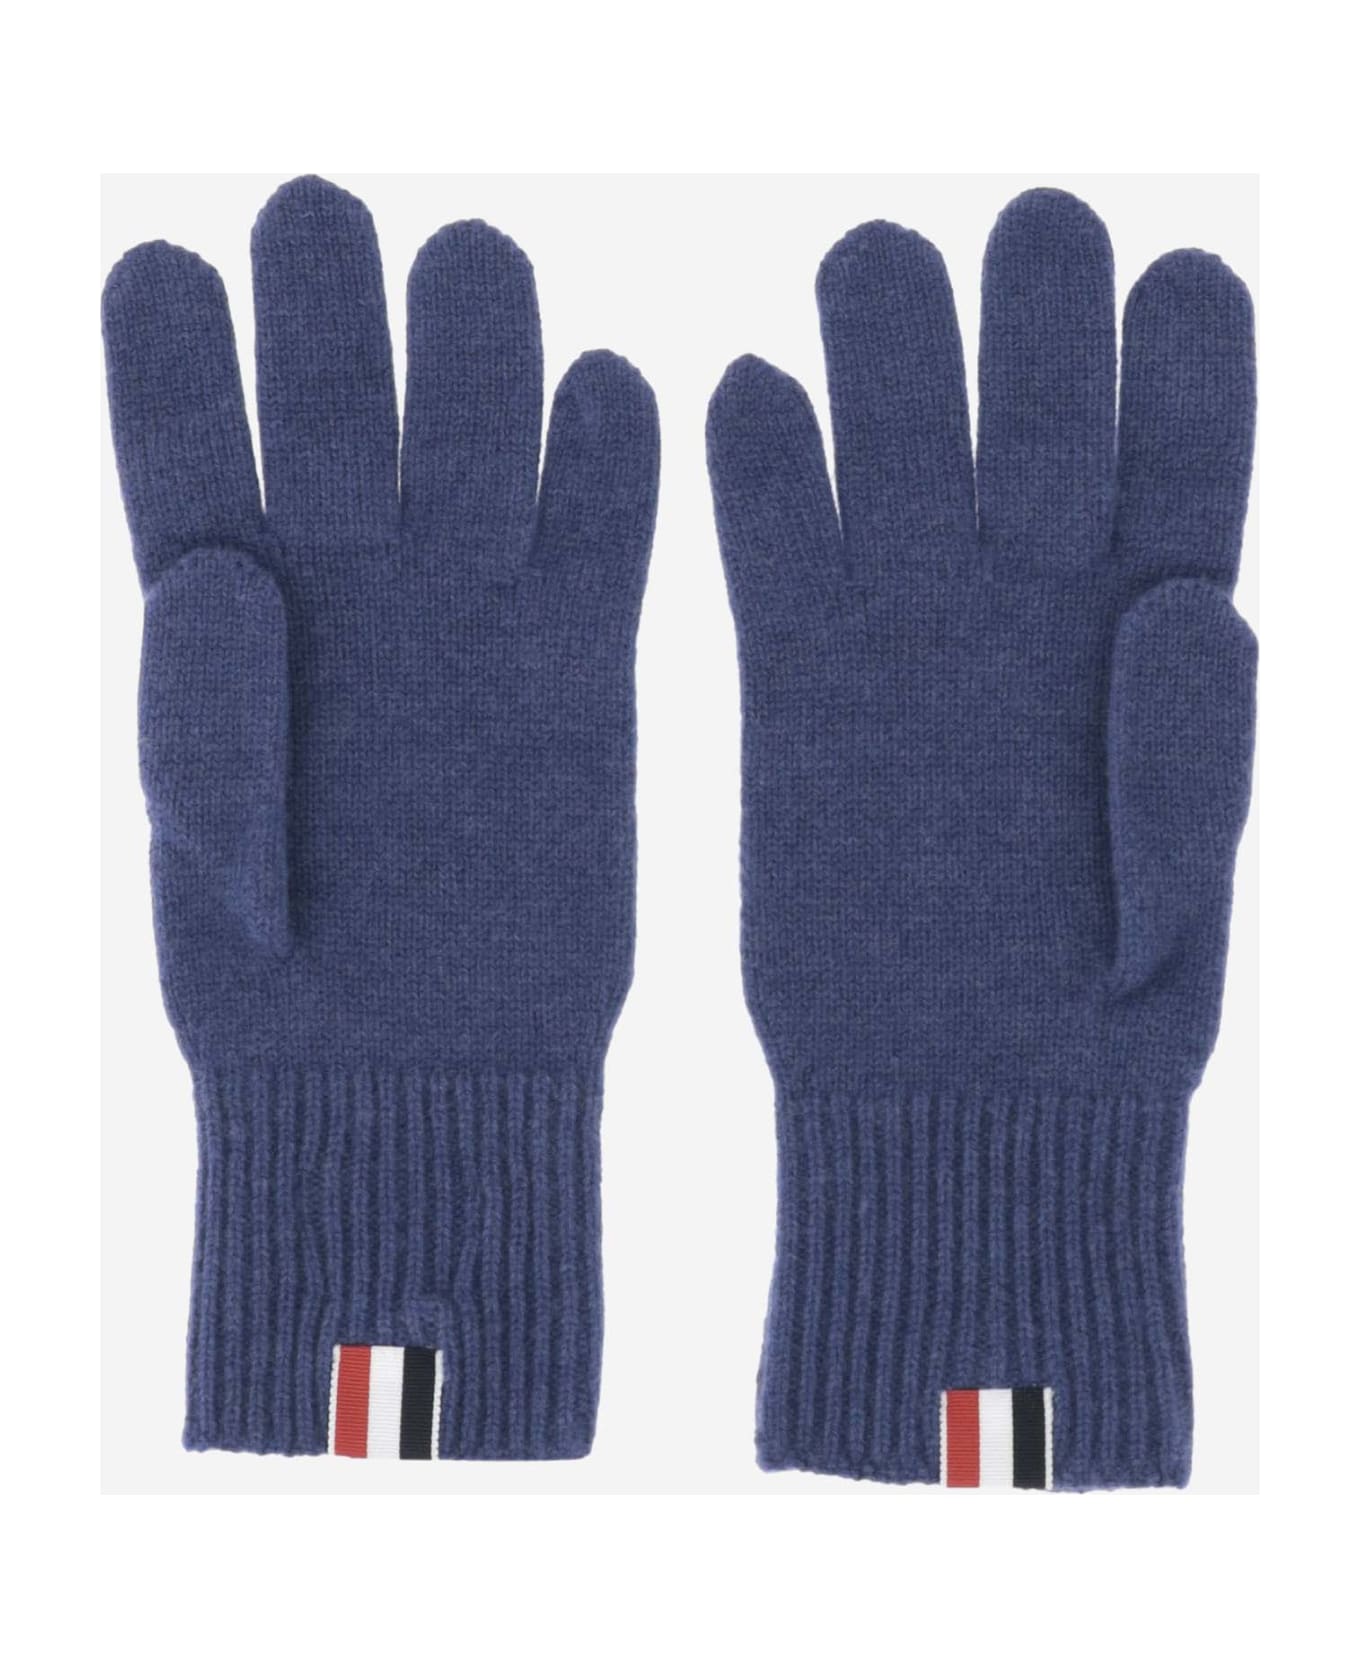 Thom Browne Wool Gloves With Tricolor Pattern - Blue